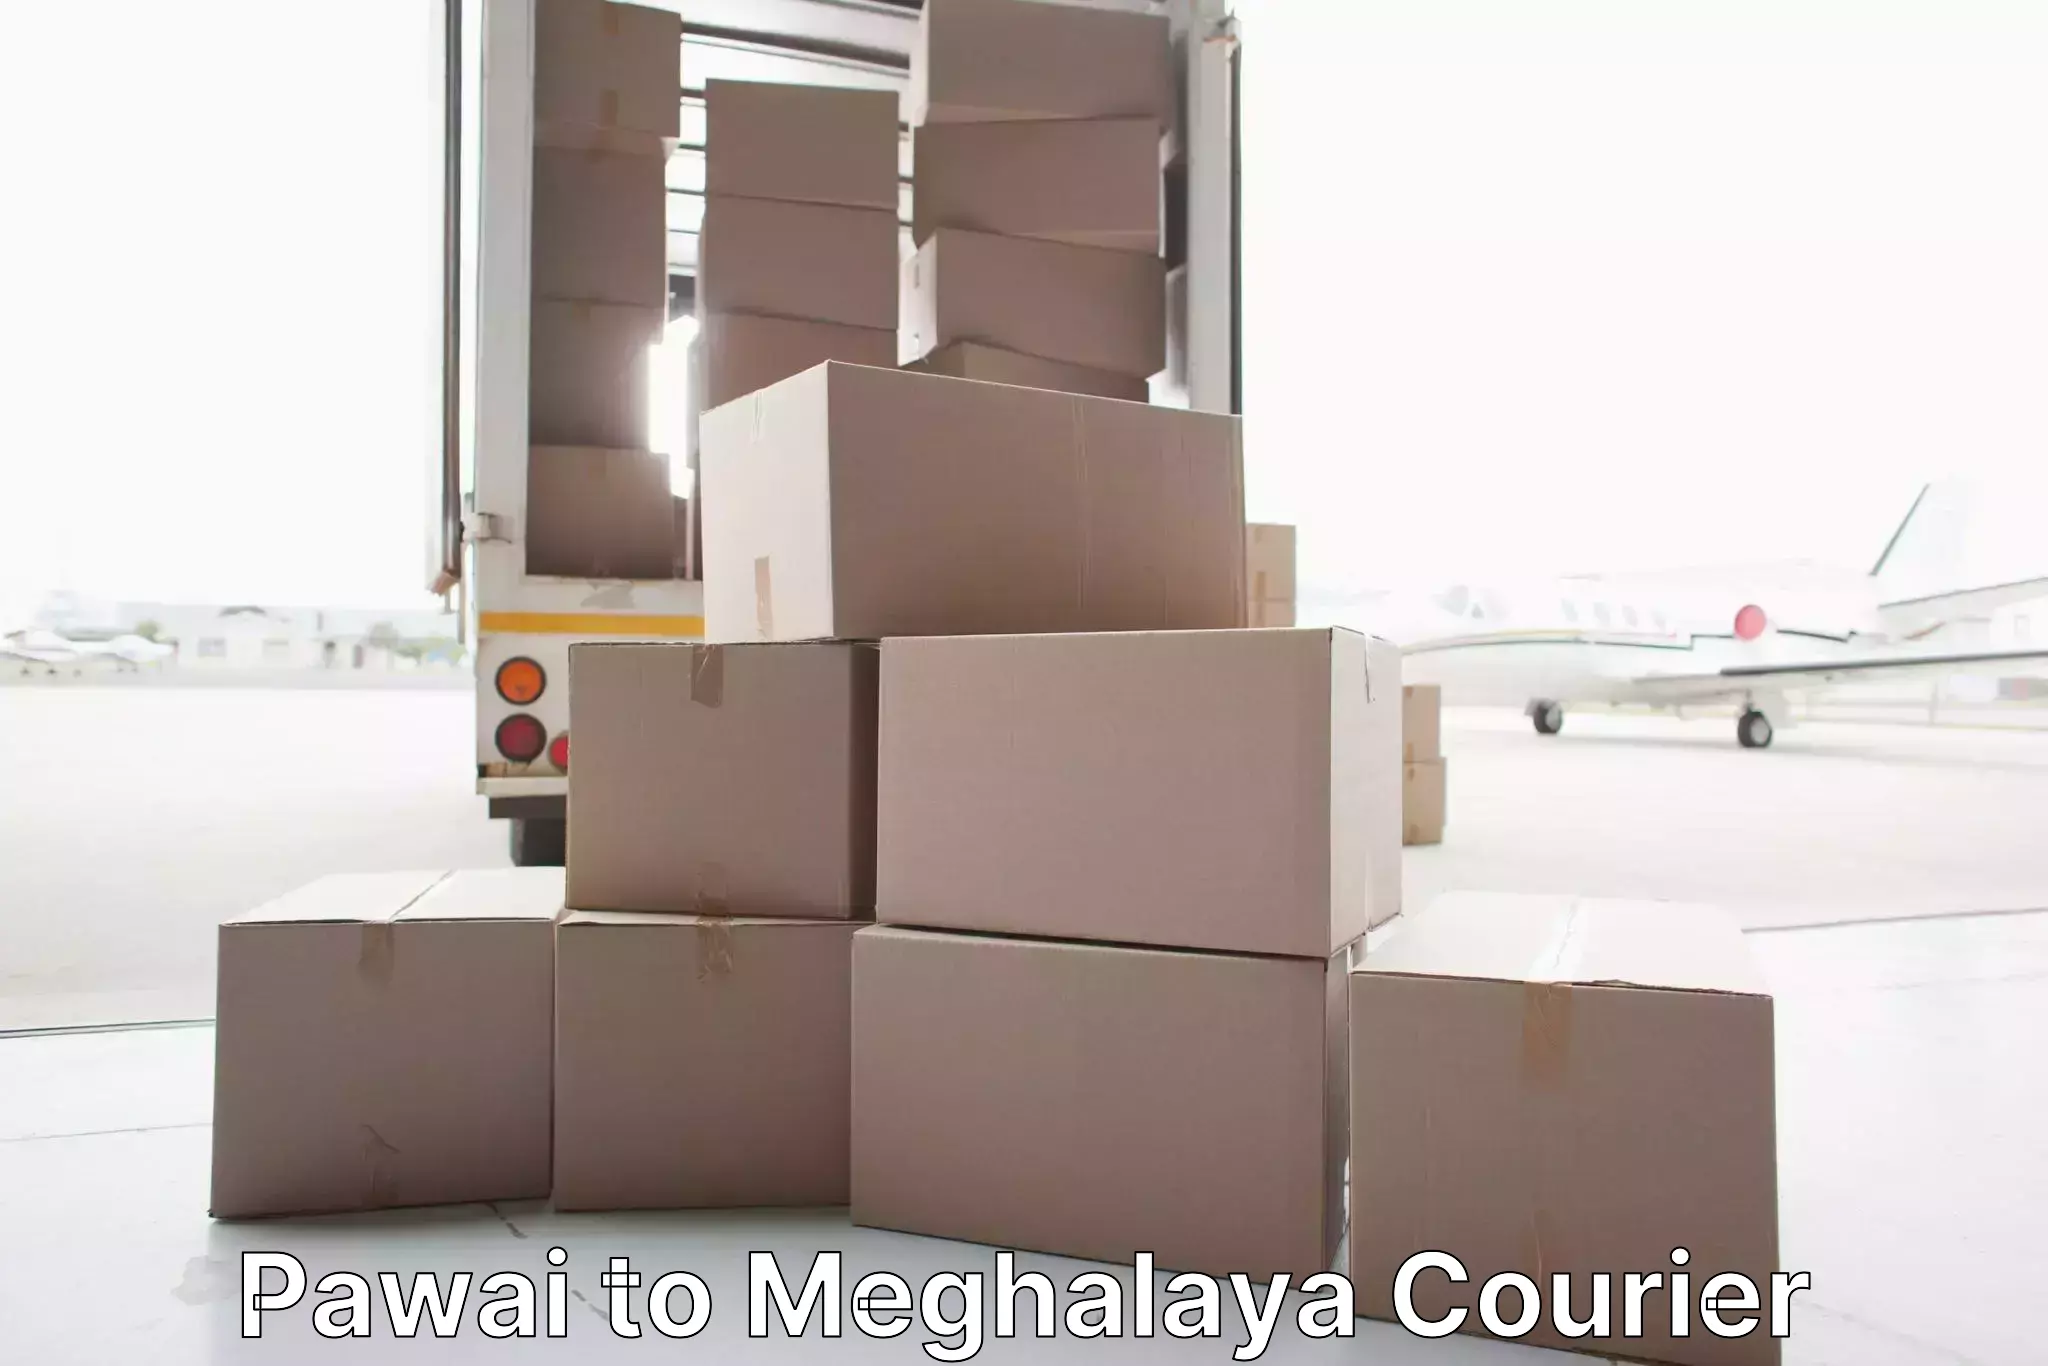 Trusted moving company Pawai to South Garo Hills